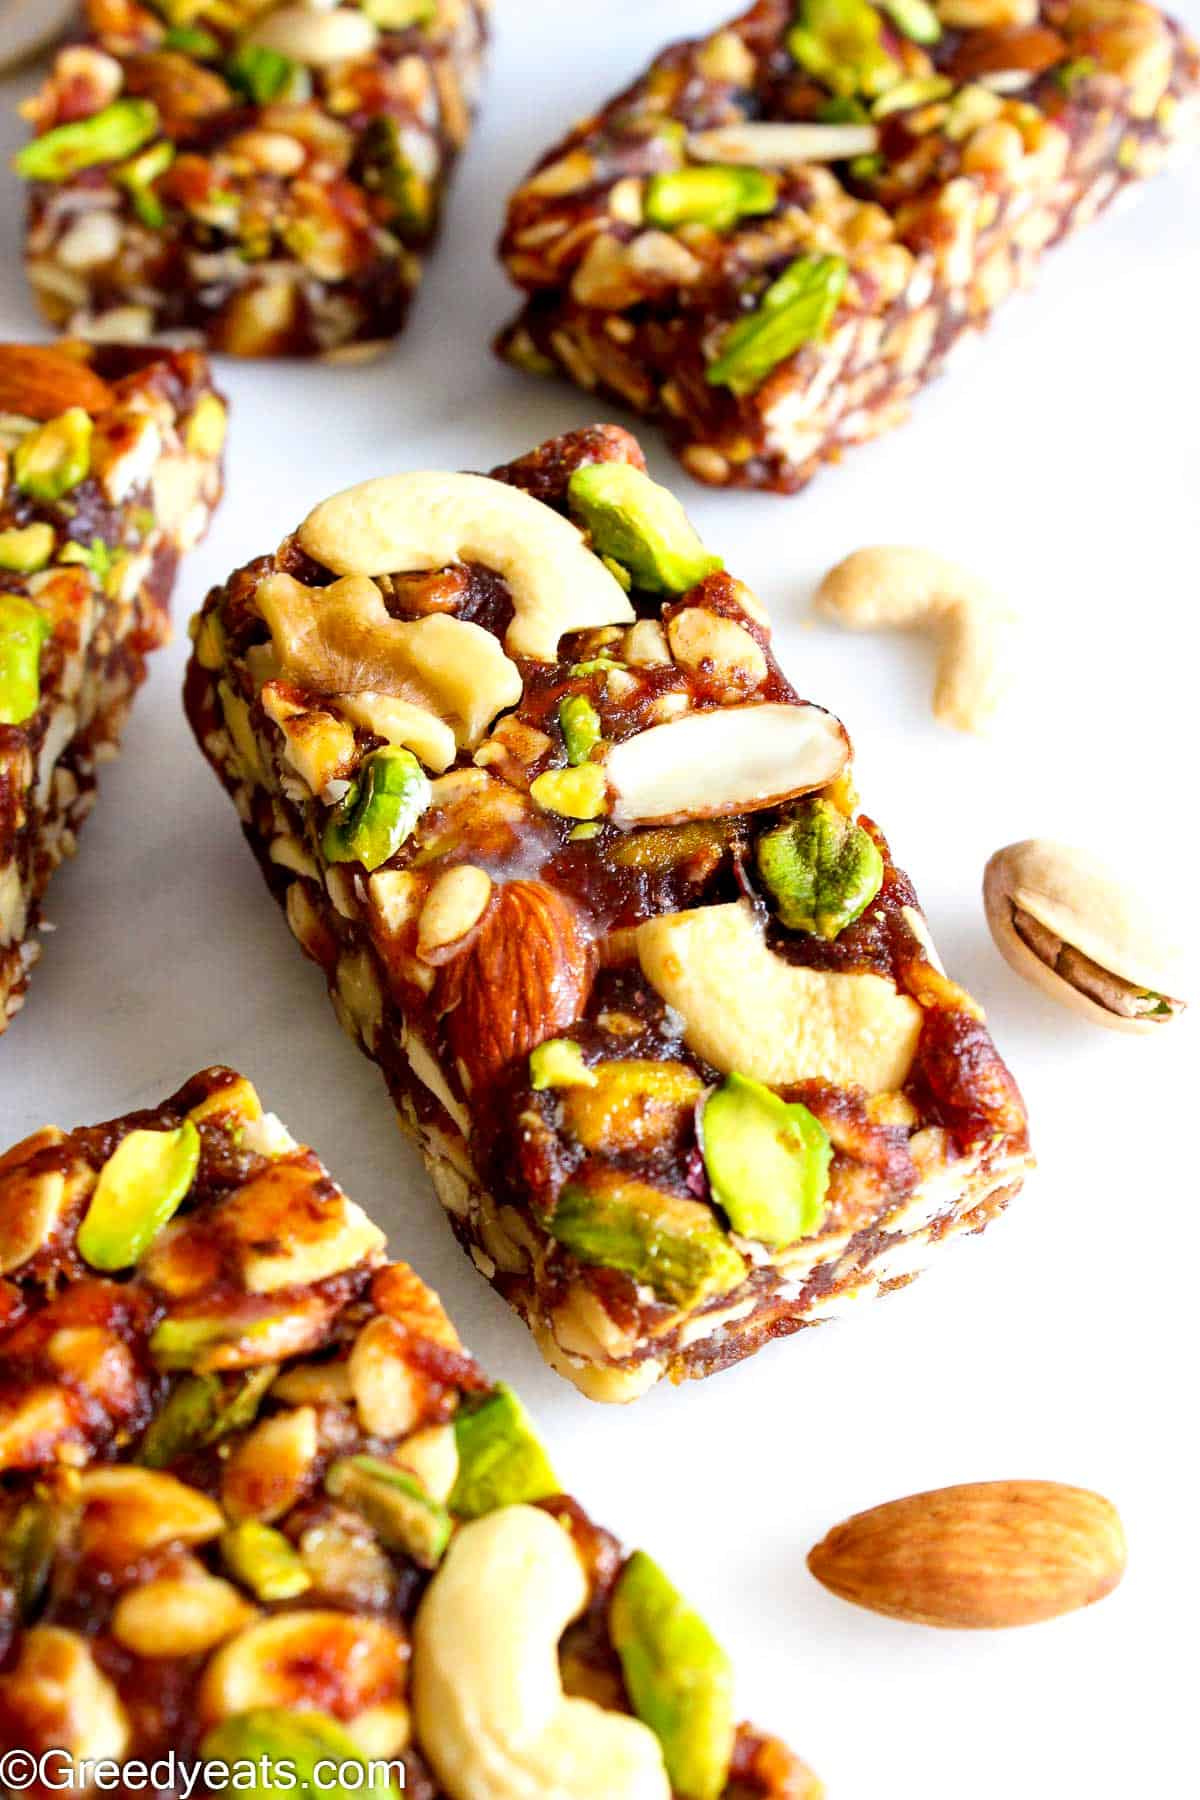 Super easy and the best Date Bars made with 3 simple ingredients topped with more nuts.